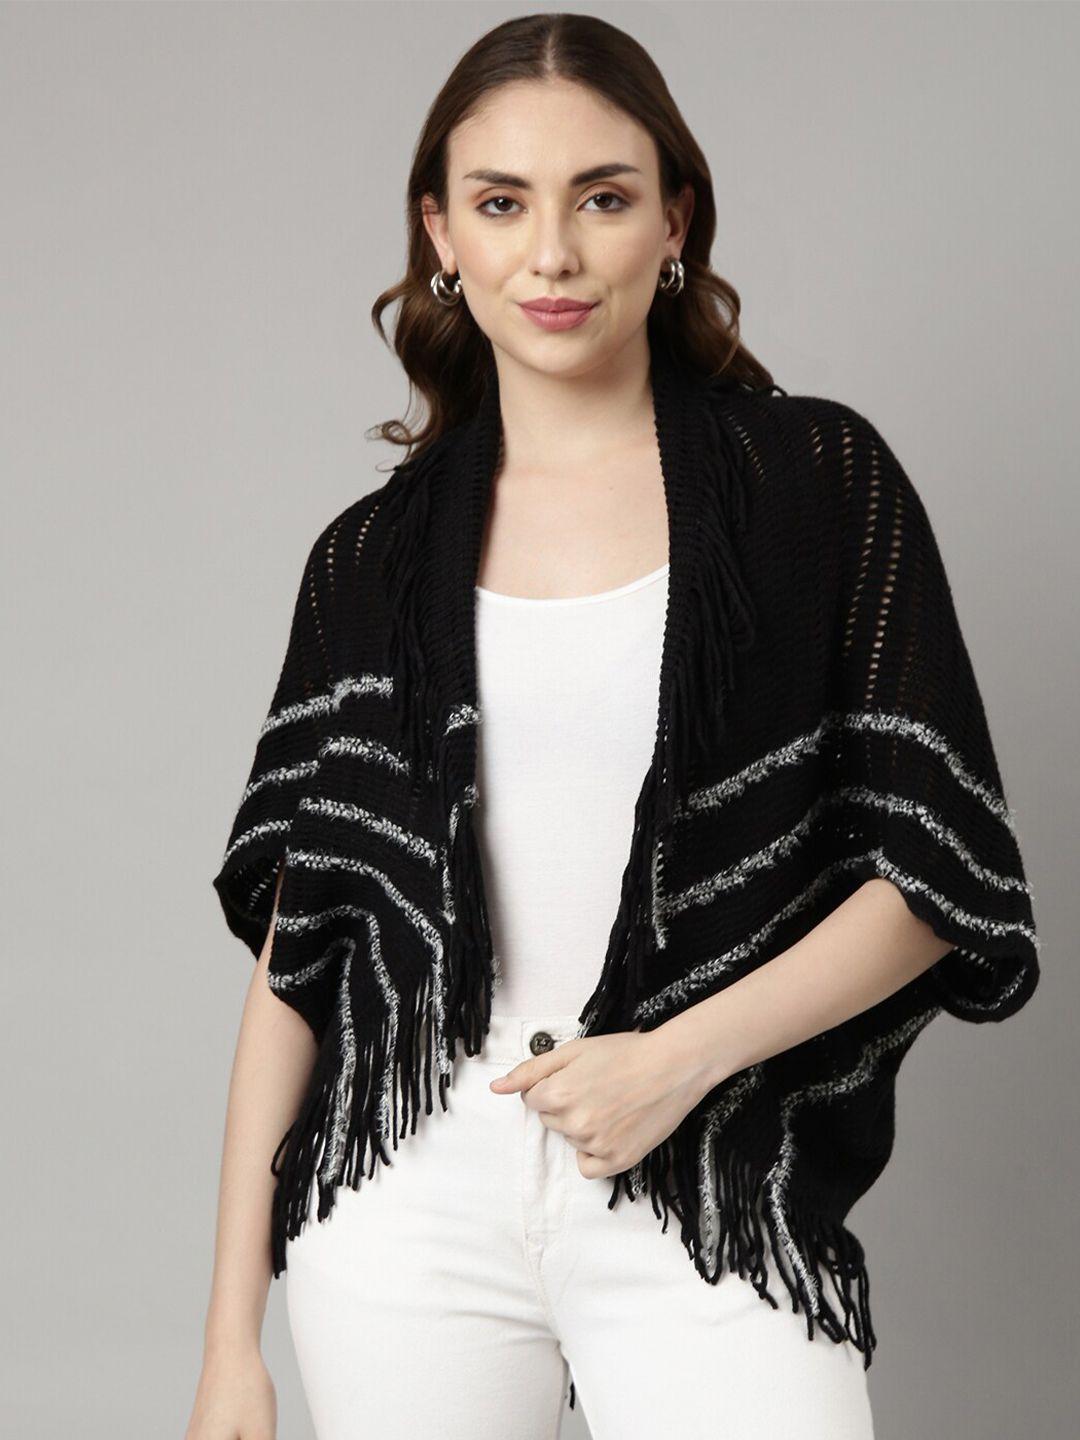 showoff striped shawl collar three-quarter sleeves poncho with fringed sweater